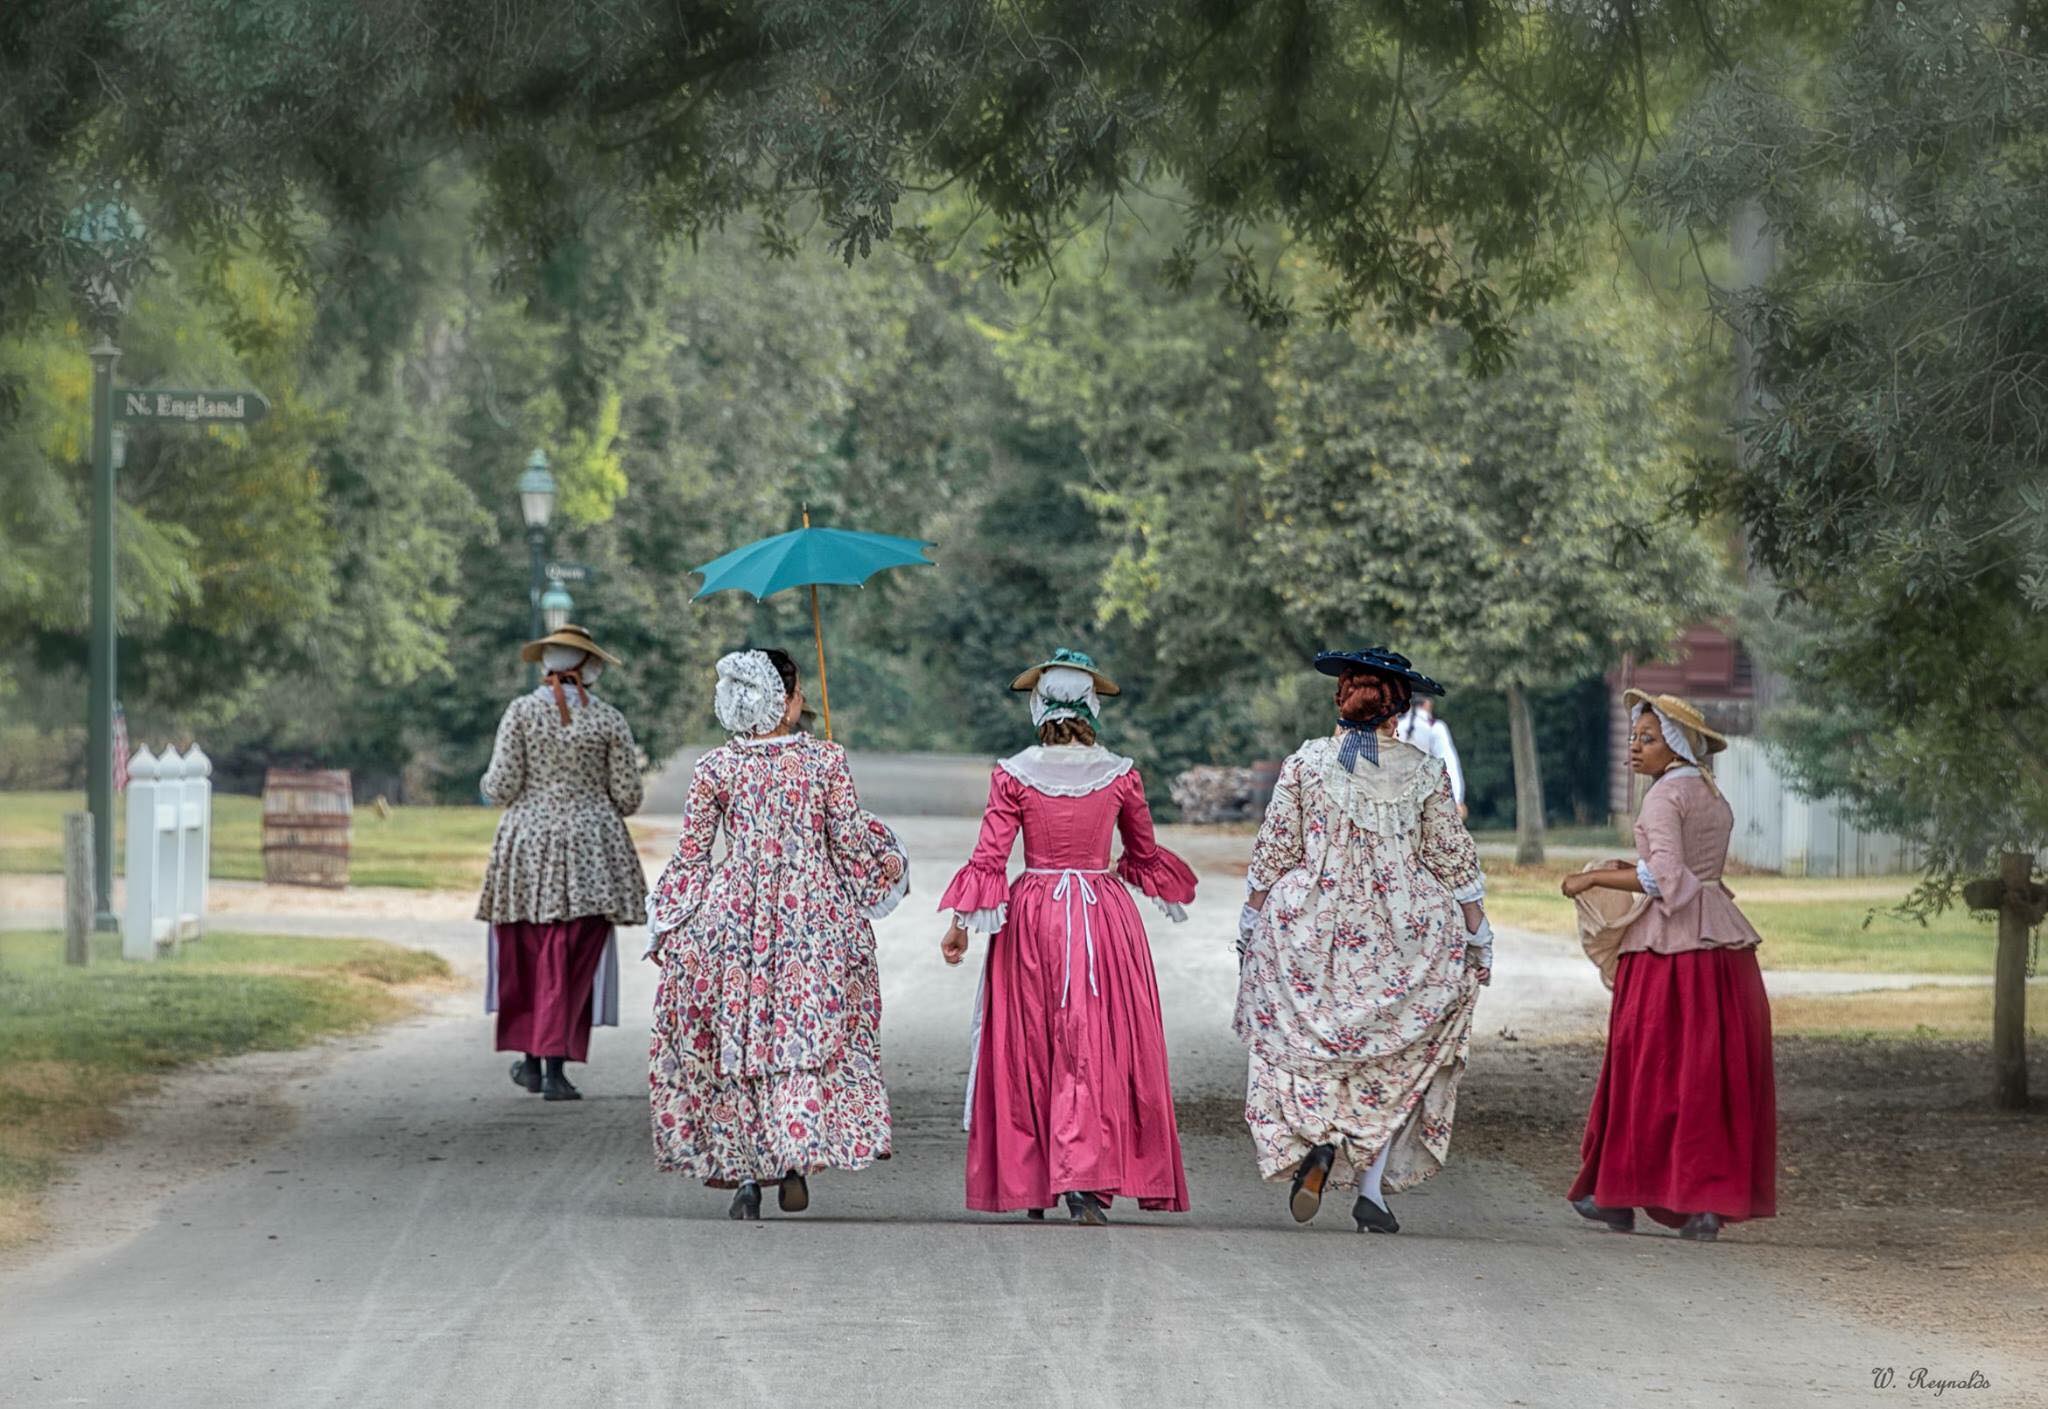 Women walk down a road in historical period dress in Colonial Williamsburg